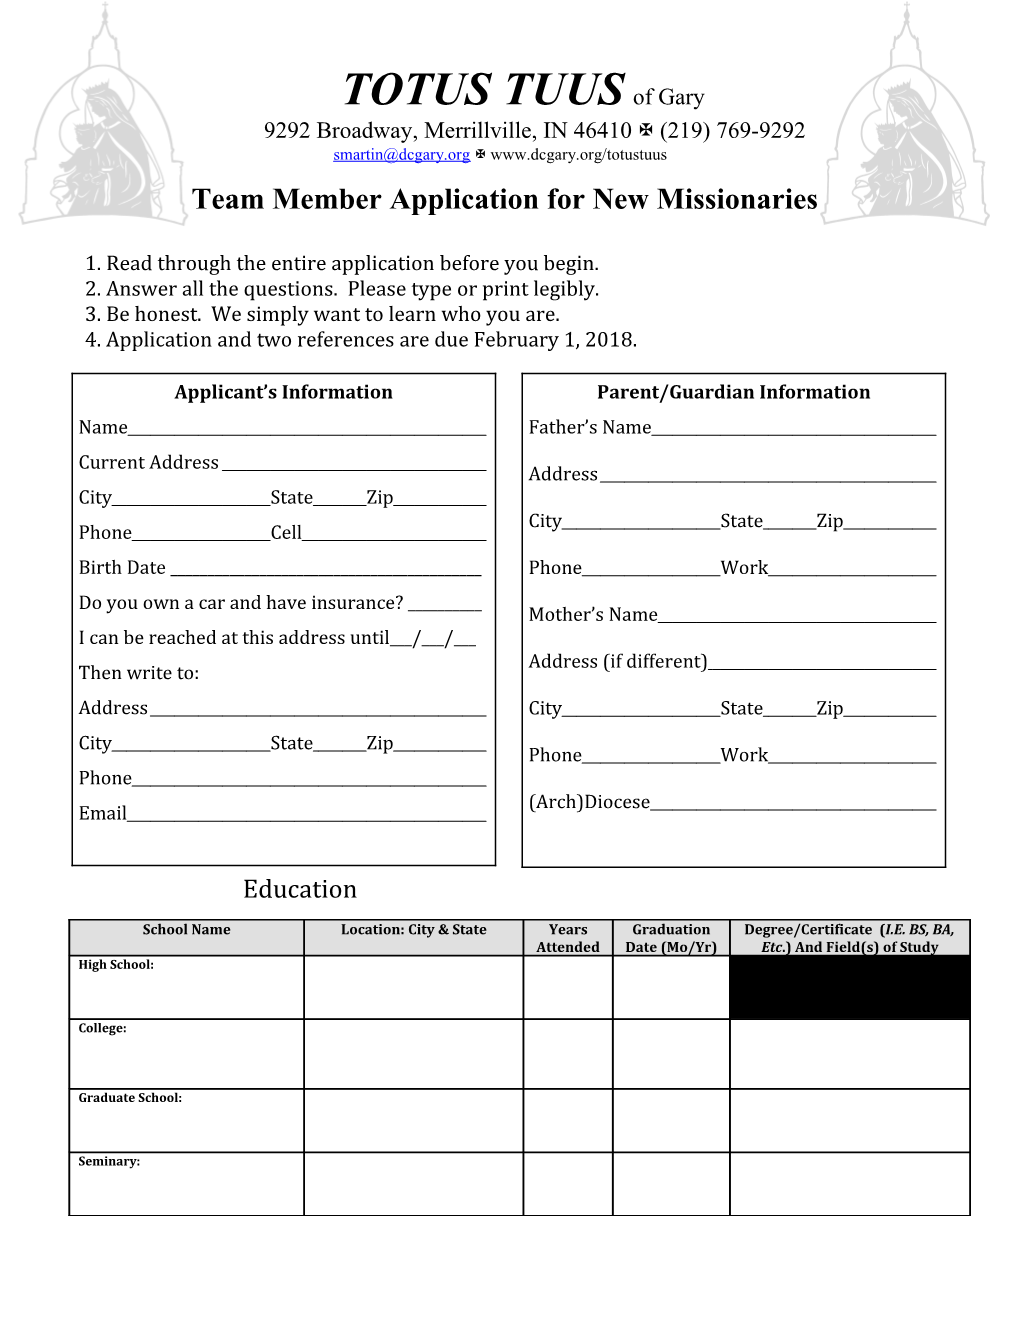 Team Member Application for New Missionaries